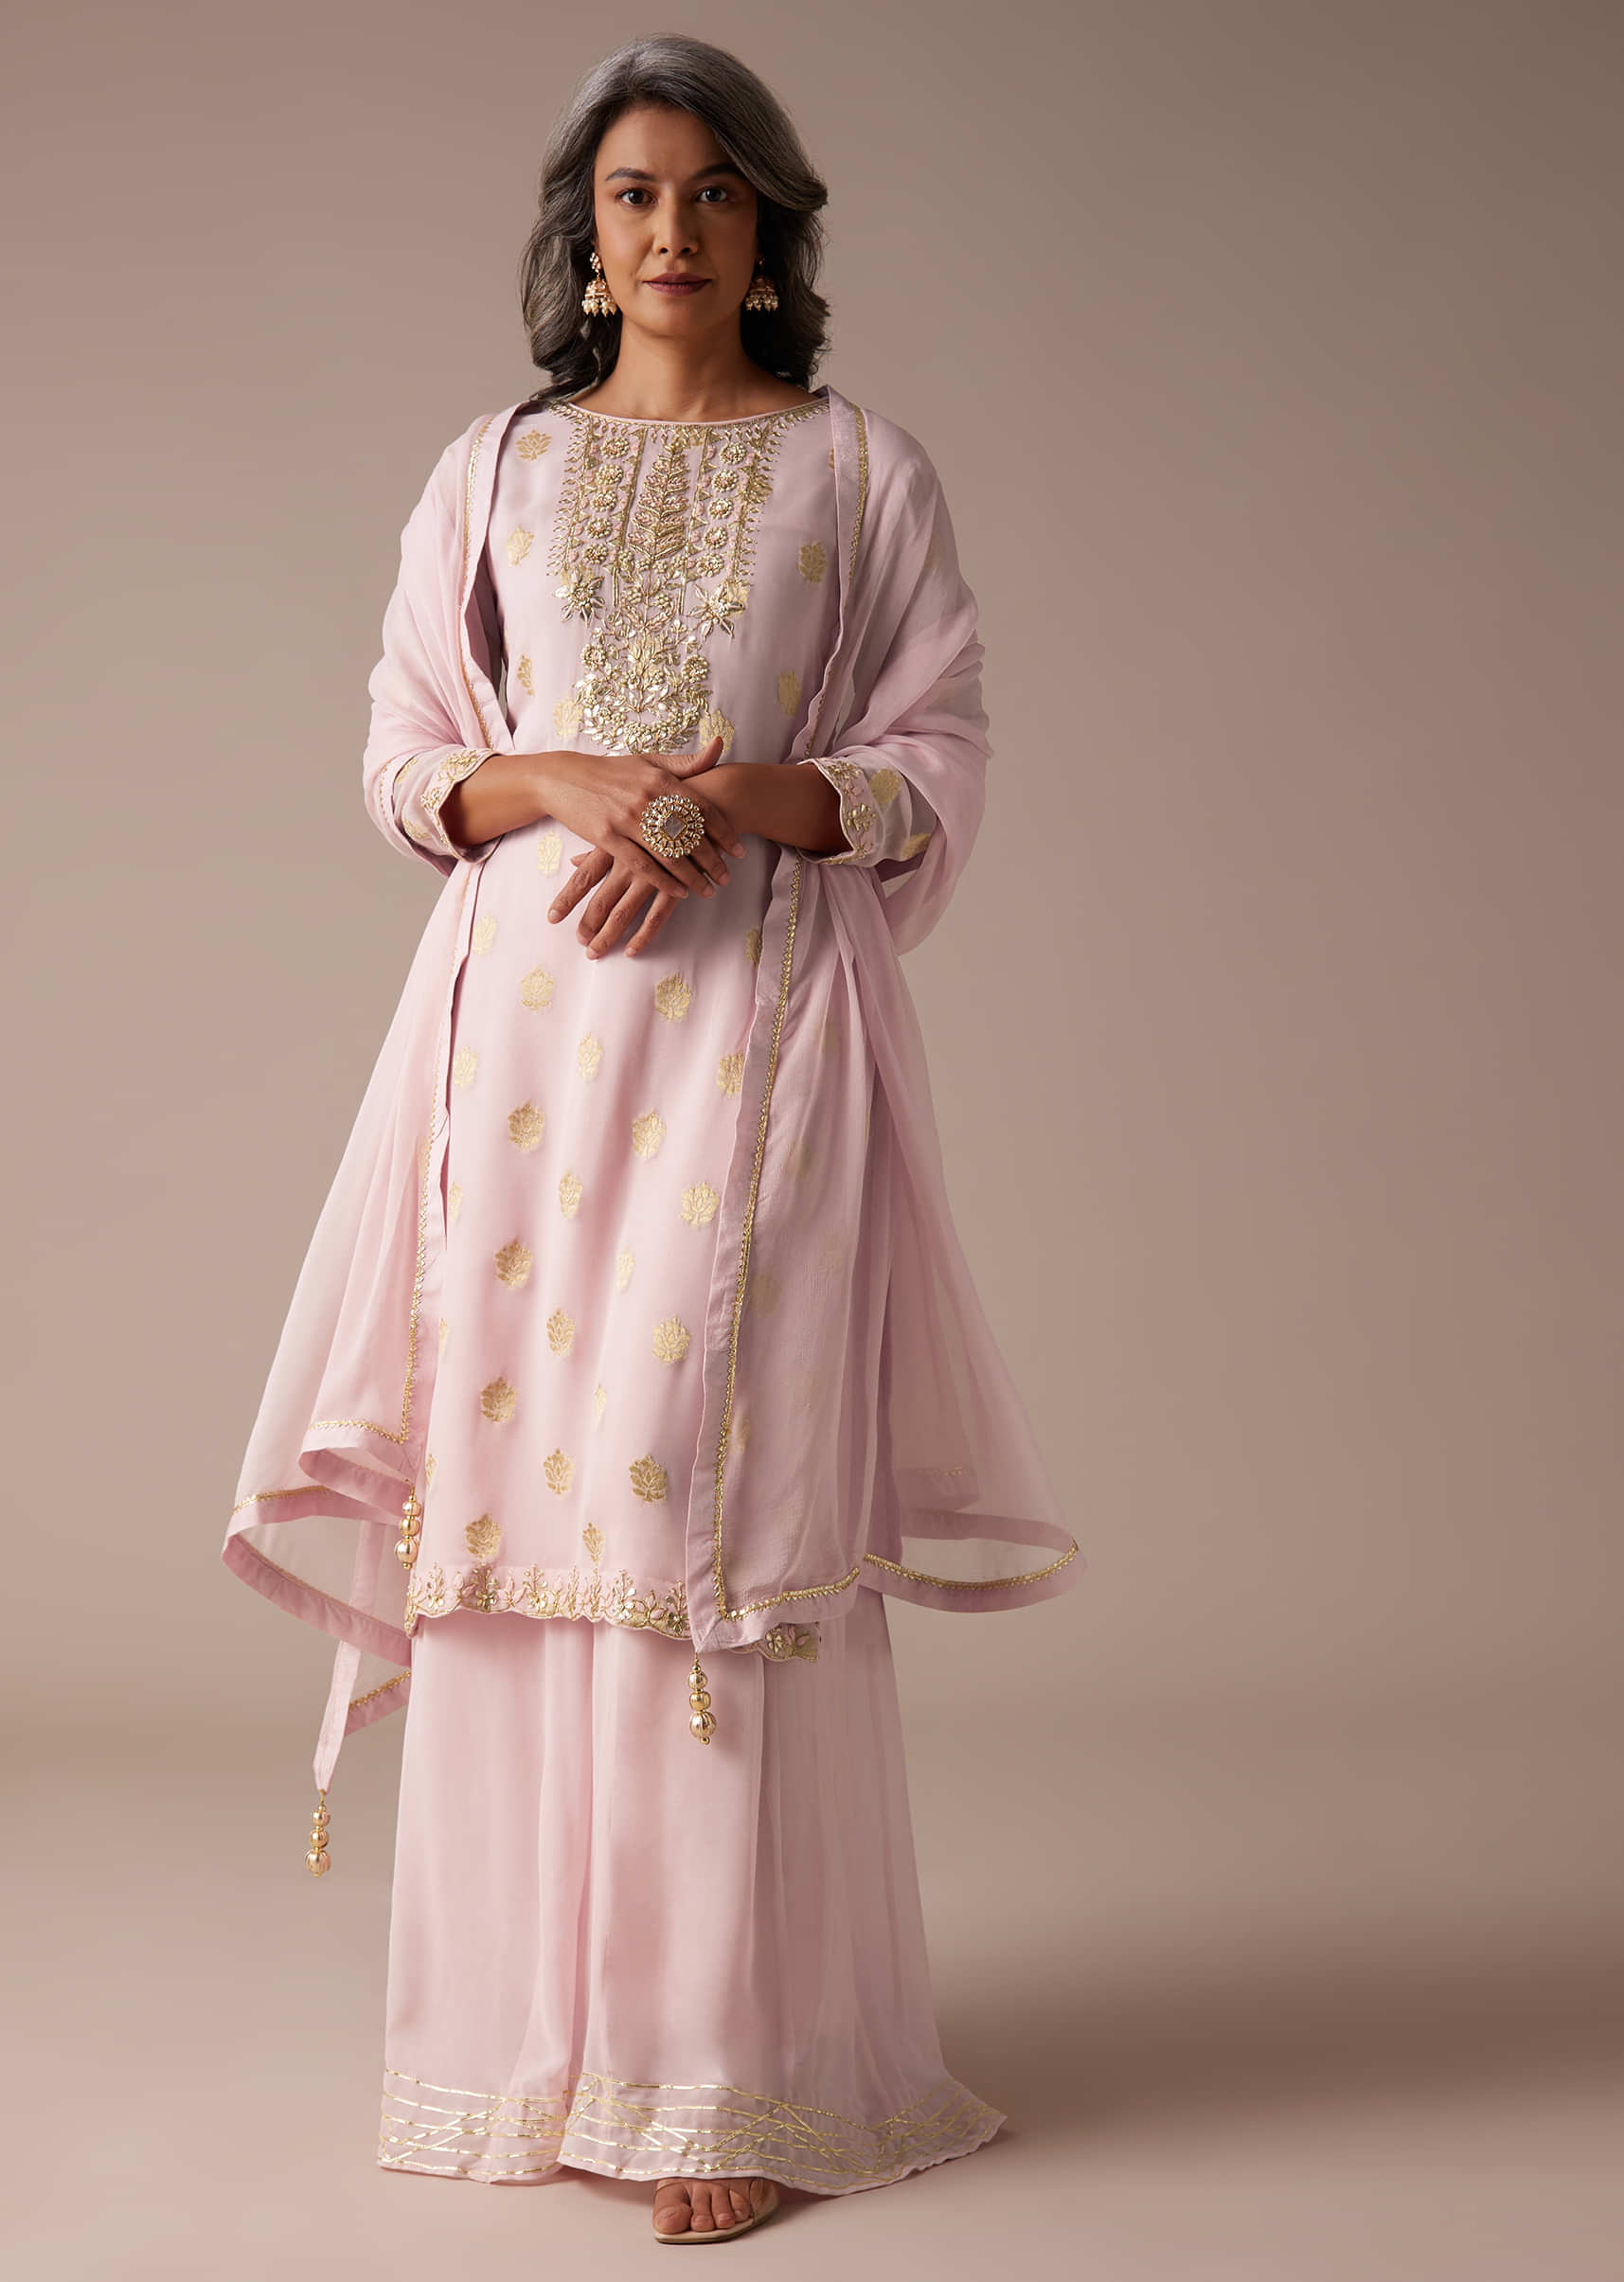 Baby Pink Straight Palazzo Suit Set In Banarasi Georgette With Brocade Work